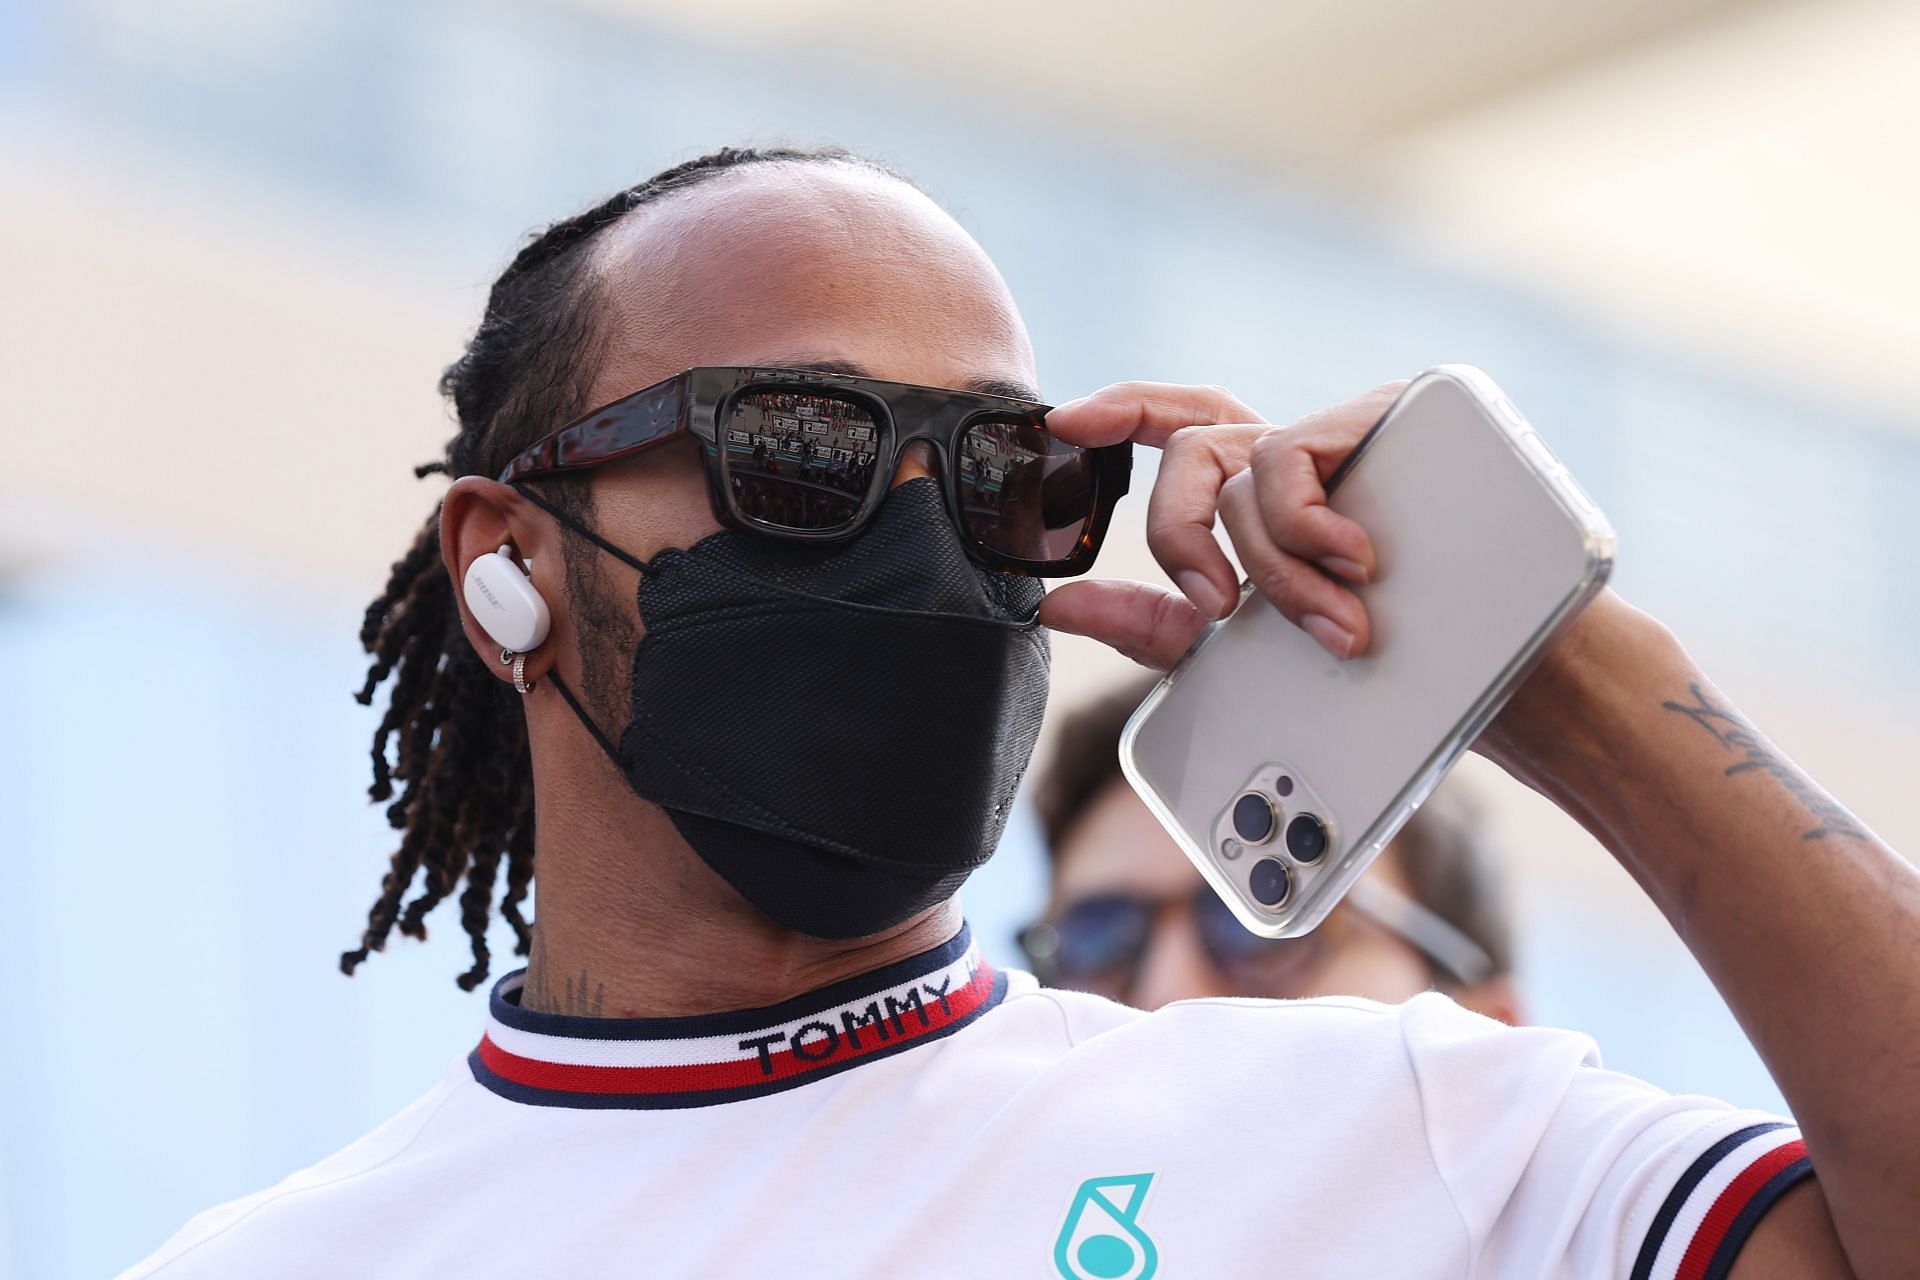 Lewis Hamilton recently made his return to social media